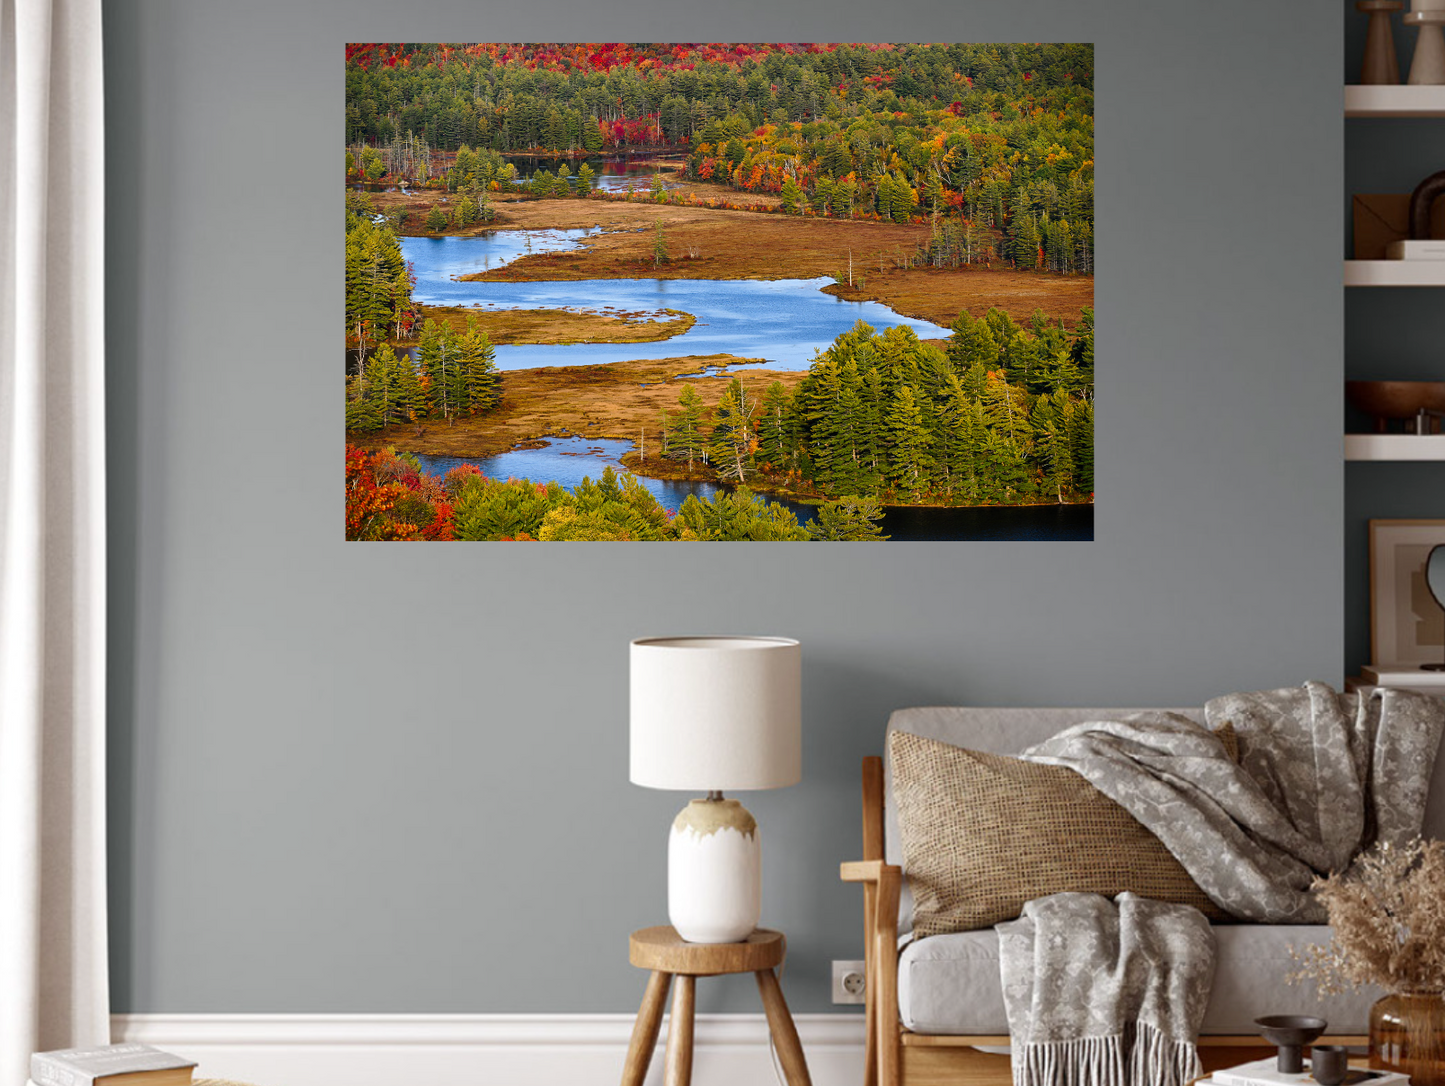 print of a river meandering through an Adirondack backcountry meadow